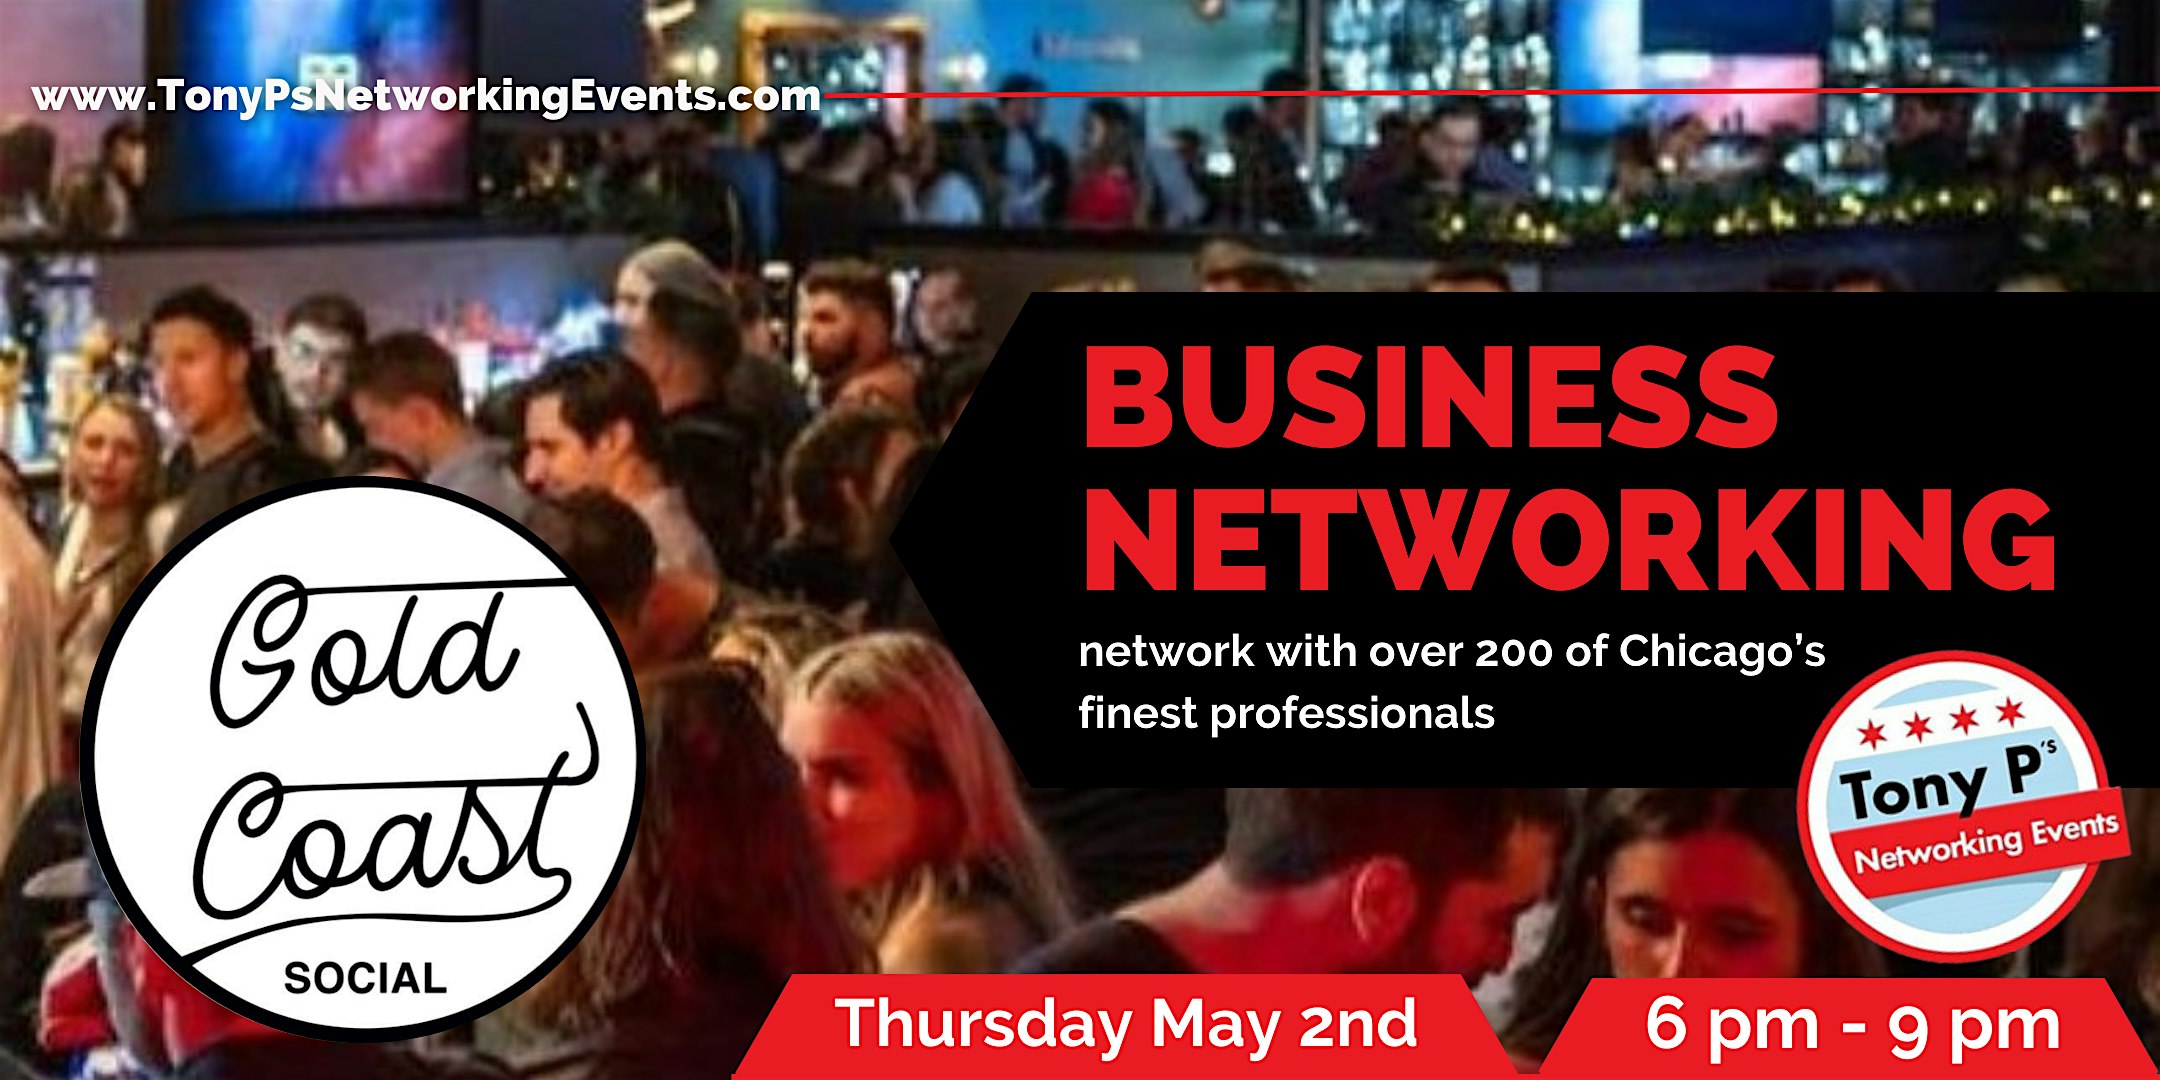 Tony P’s May Business Networking Event at Gold Coast Social: Thurs May 2nd